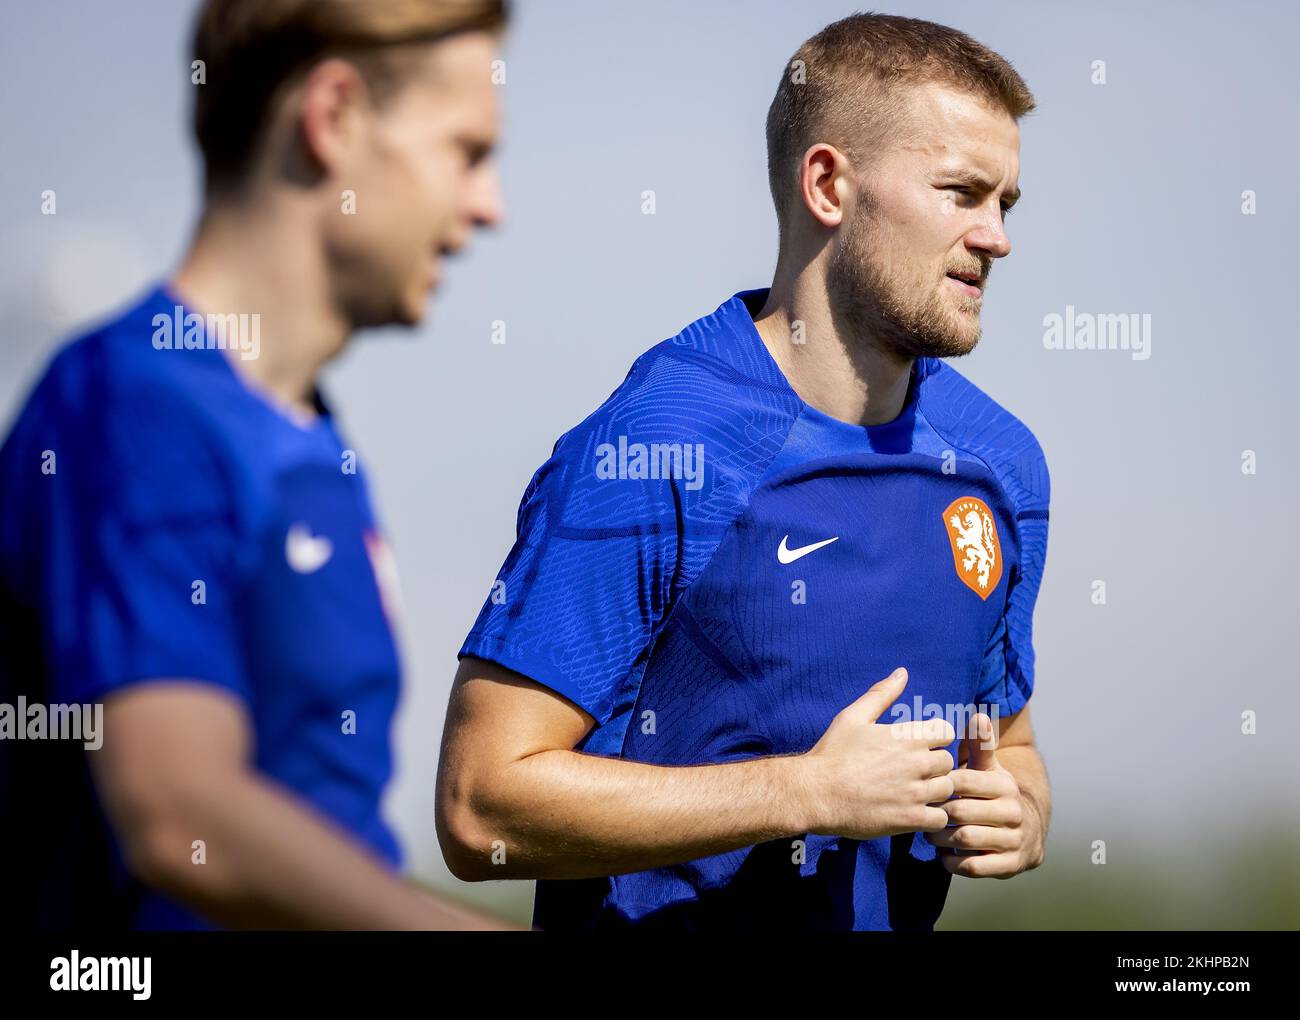 DOHA - Frenkie de Jong of Holland and Matthijs de Ligt of Holland during a training session of the Dutch national team at the Qatar University training complex on November 24, 2022 in Doha, Qatar. The Dutch national team is preparing for the World Cup match against Ecuador. ANP KOEN VAN WEEL Stock Photo